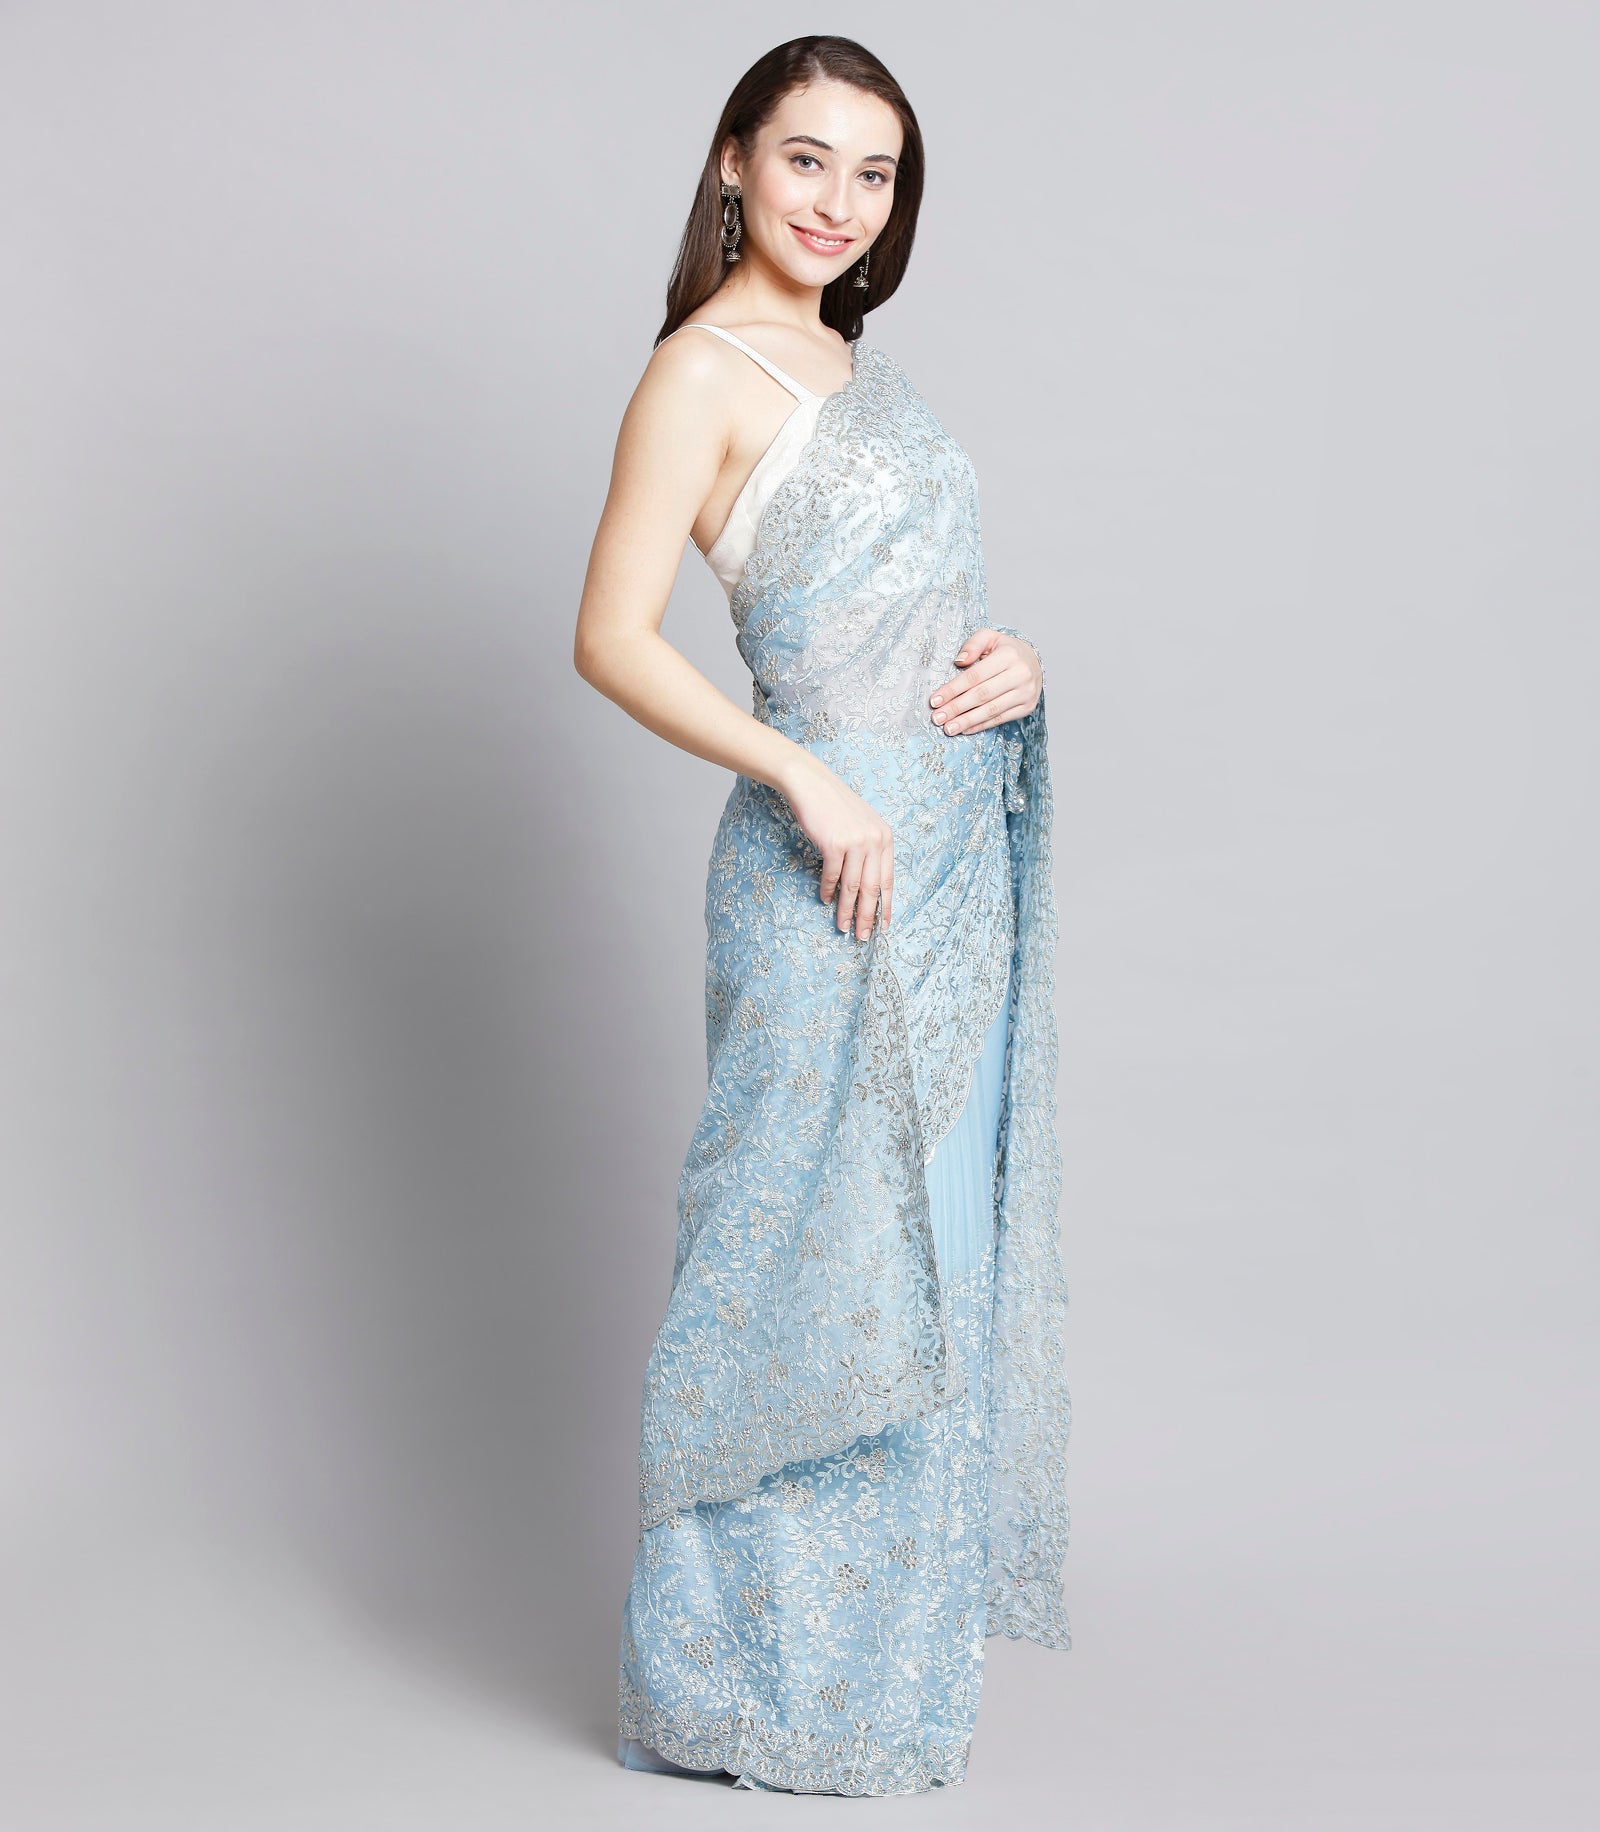 Sky Blue Organza Saree With Floral Embroidery